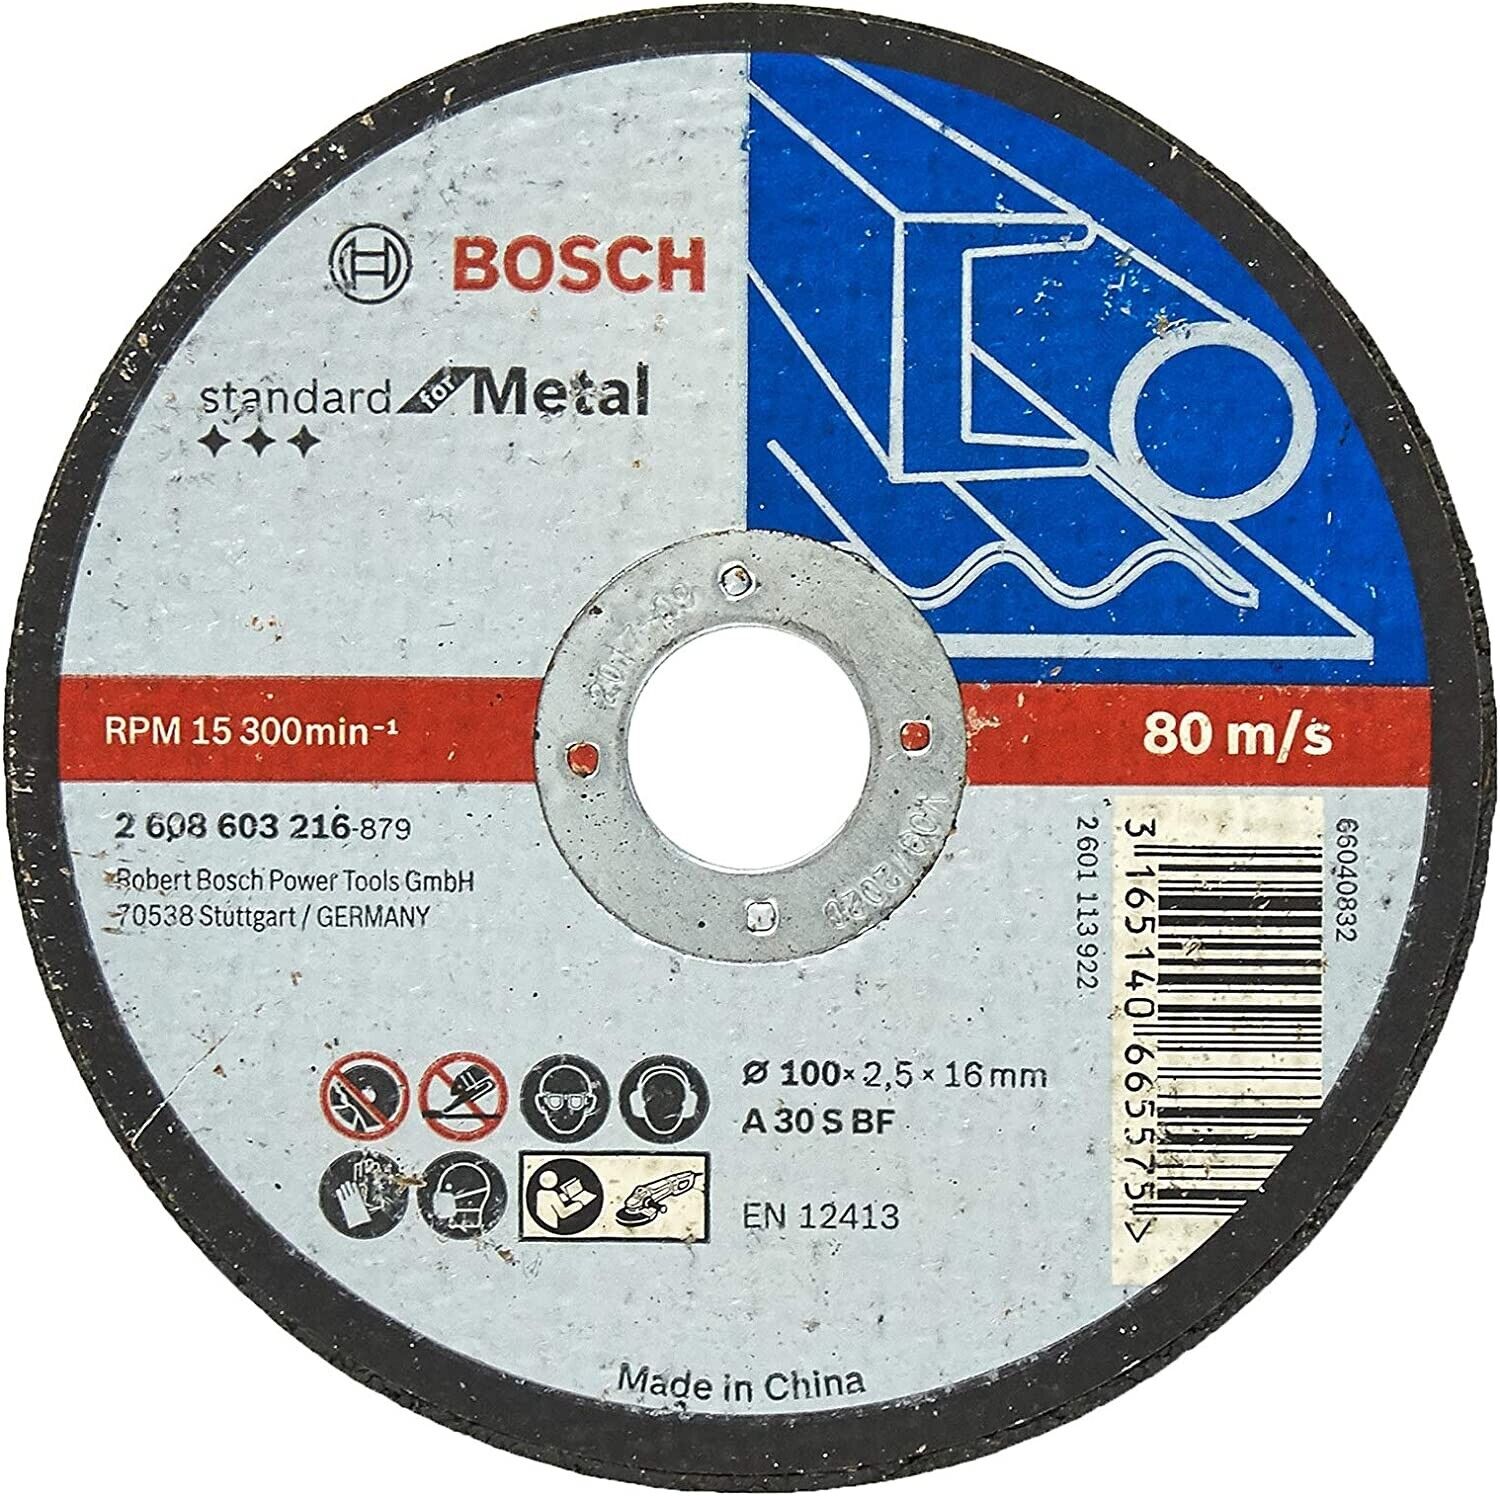 BOSCH, 5 3/8 in Head Wd, 21 in Overall Lg, Breaker and Demolition Hammer  Chisel - 1UM12